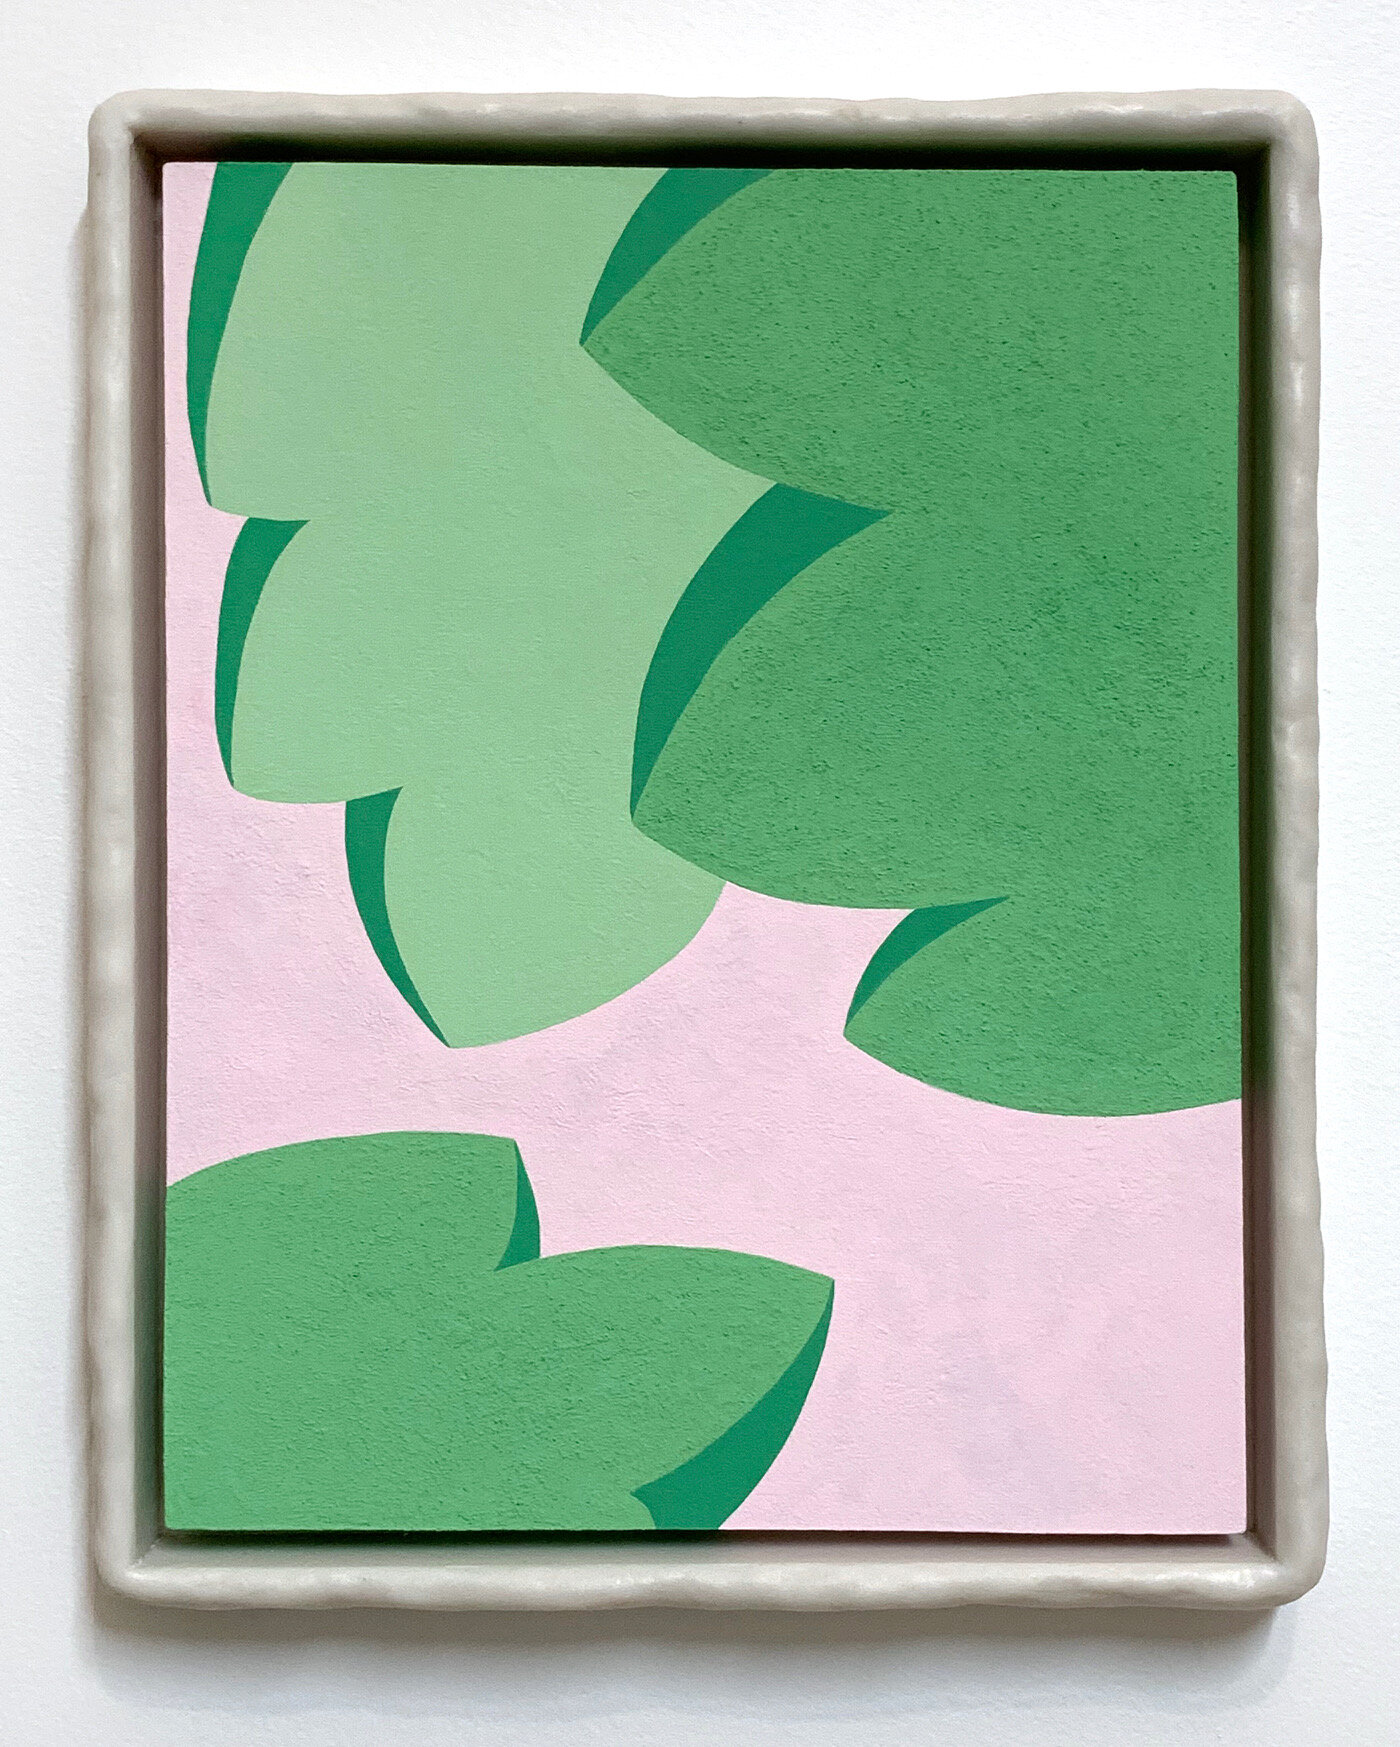   Three Leaves , 2019  15 x 12 x 2 inches  Flashe on wood panel in marble composite frame   